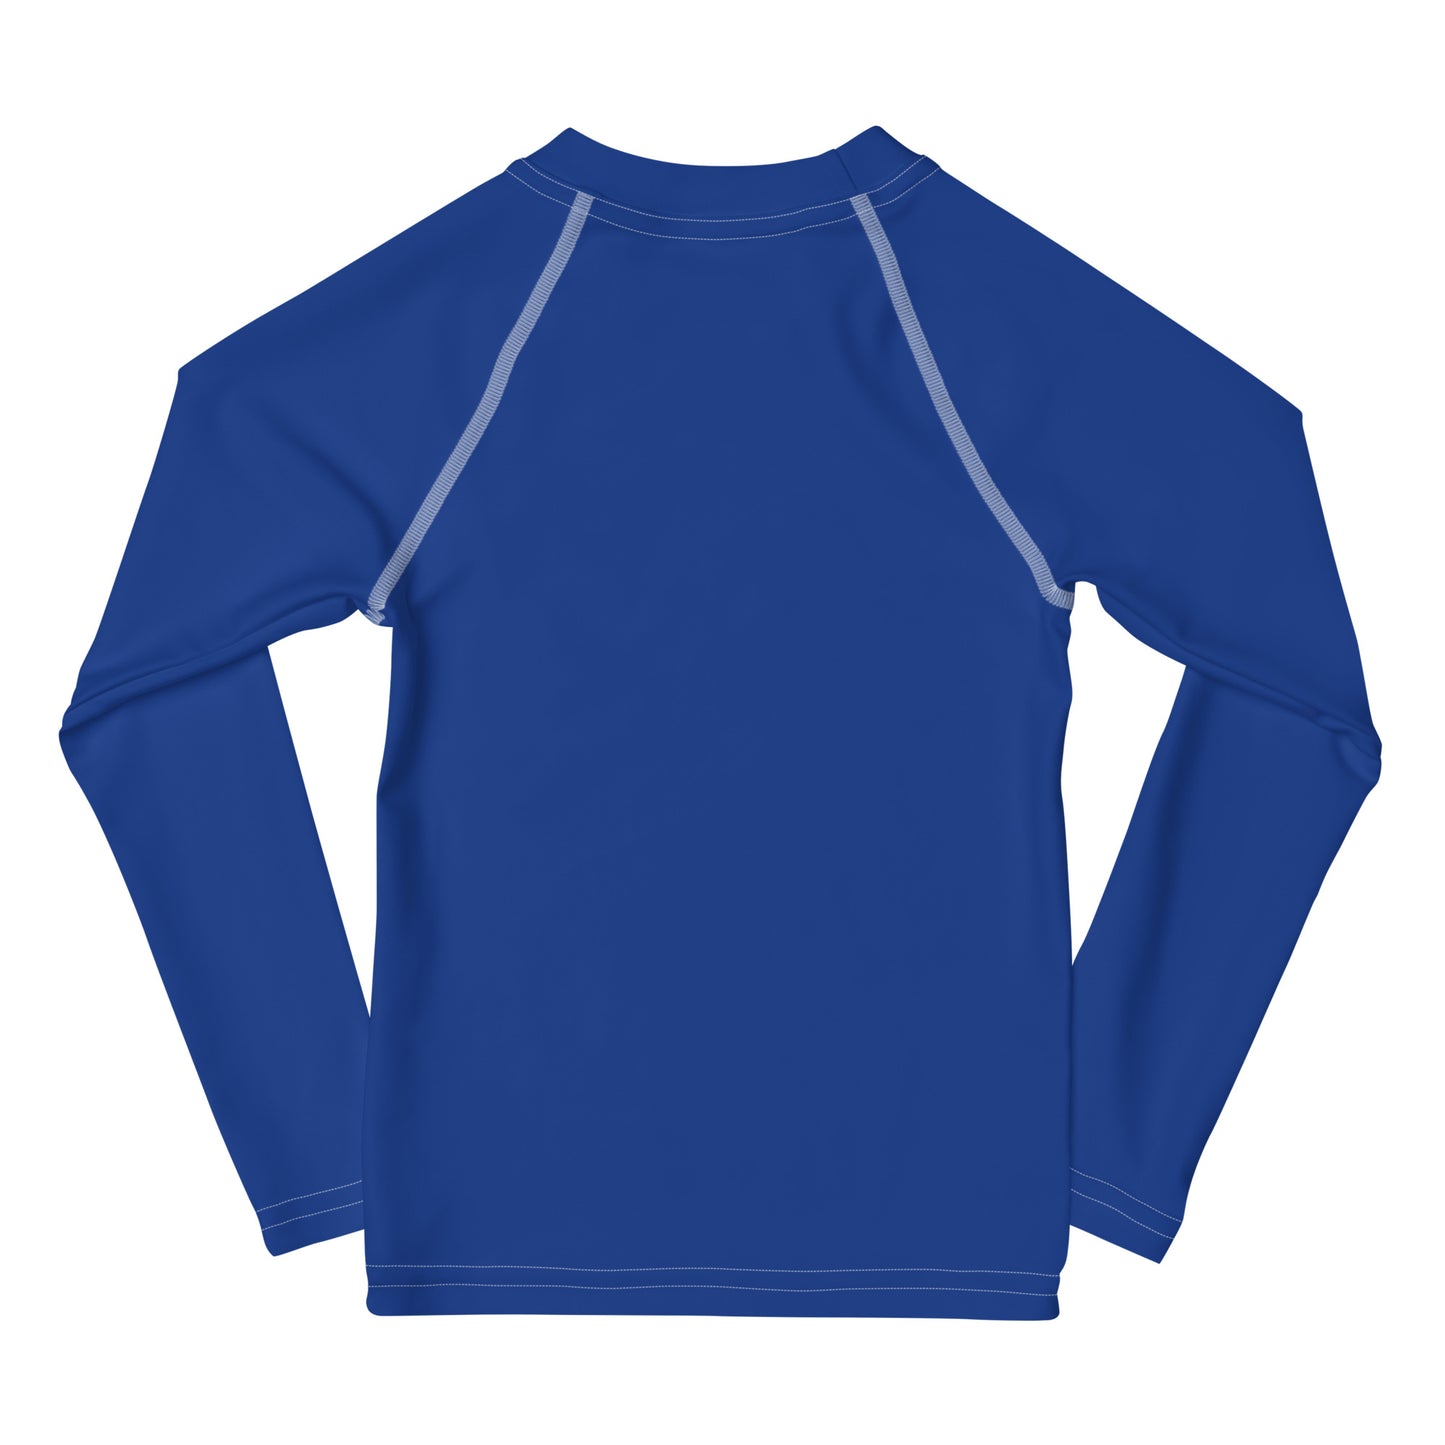 Azure Climate Change Global Warming Statement - Sustainably Made Kid's Long Sleeve Tee